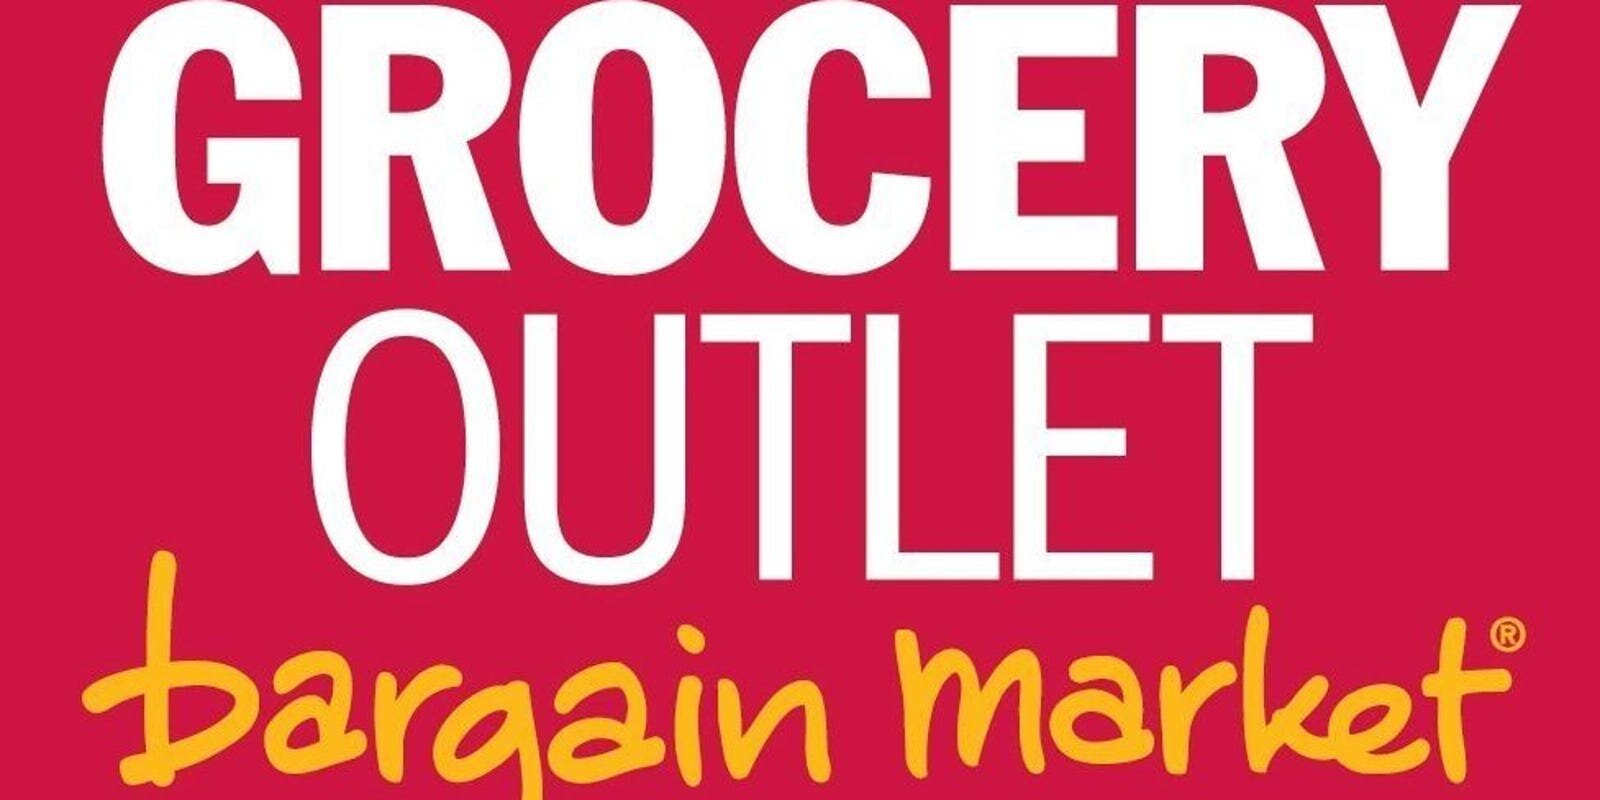 Logo - Grocery Outlet box .jpg